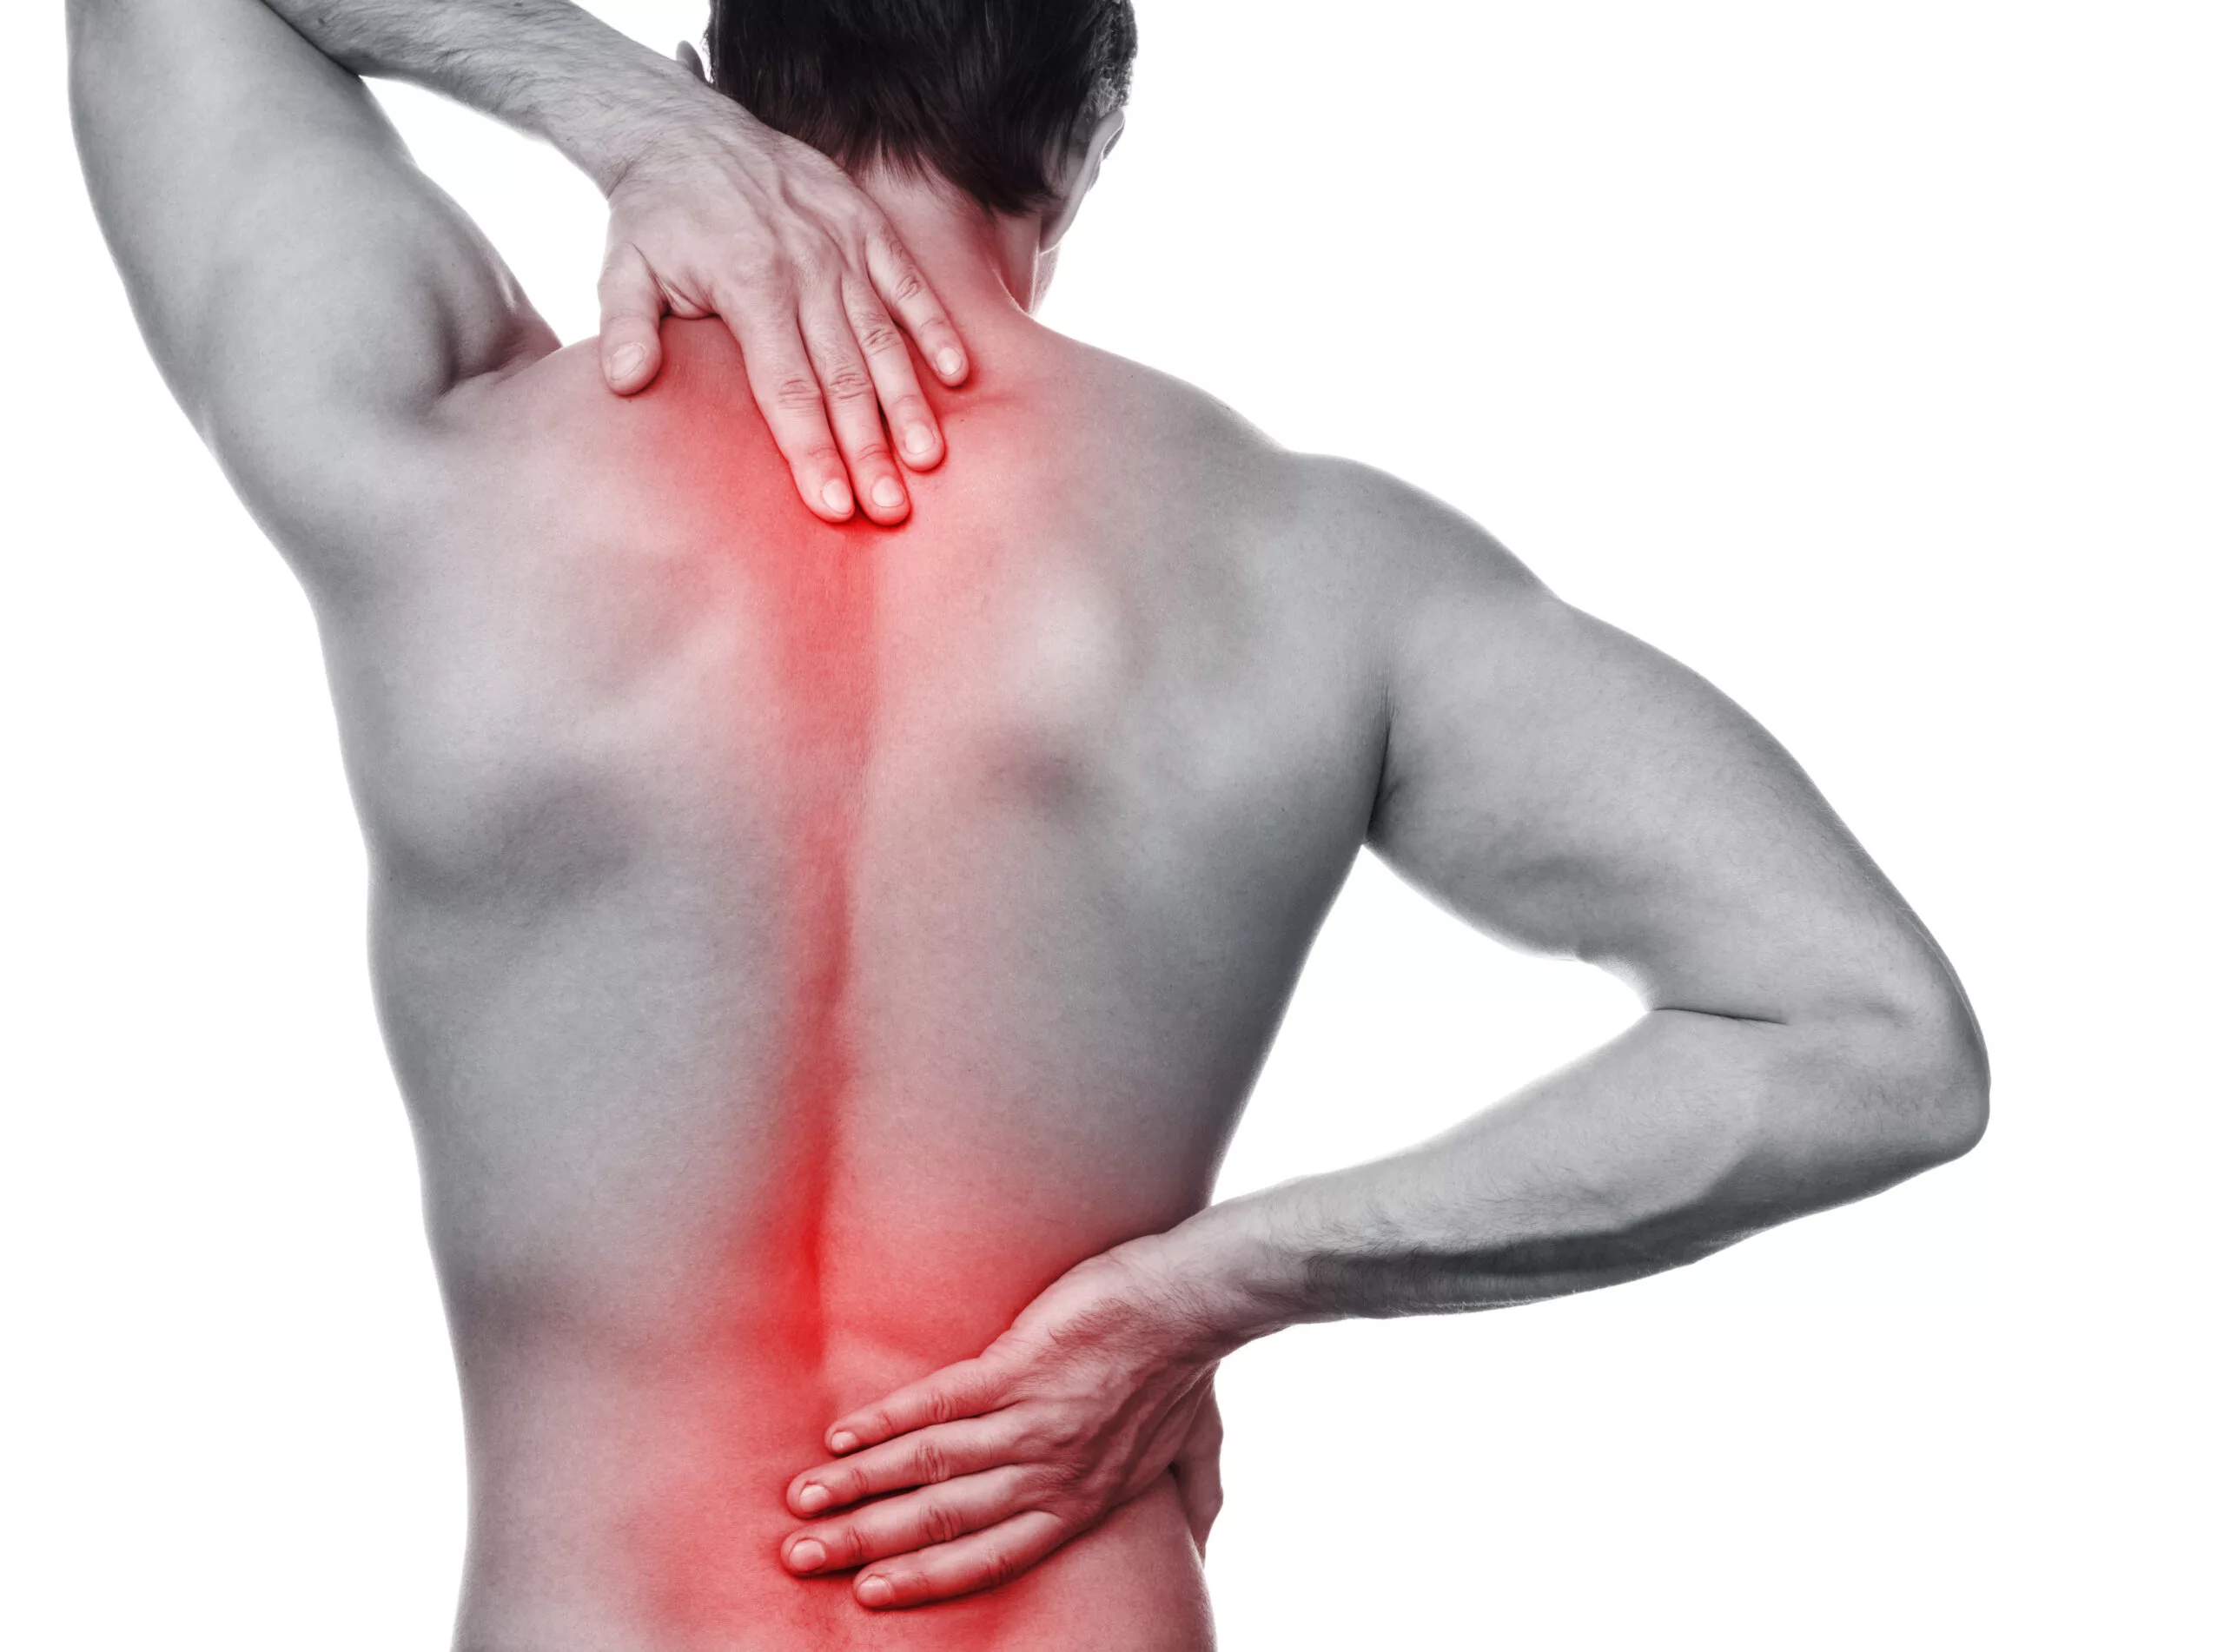 Facet Joint Pain And Its Treatment - Padda Institute